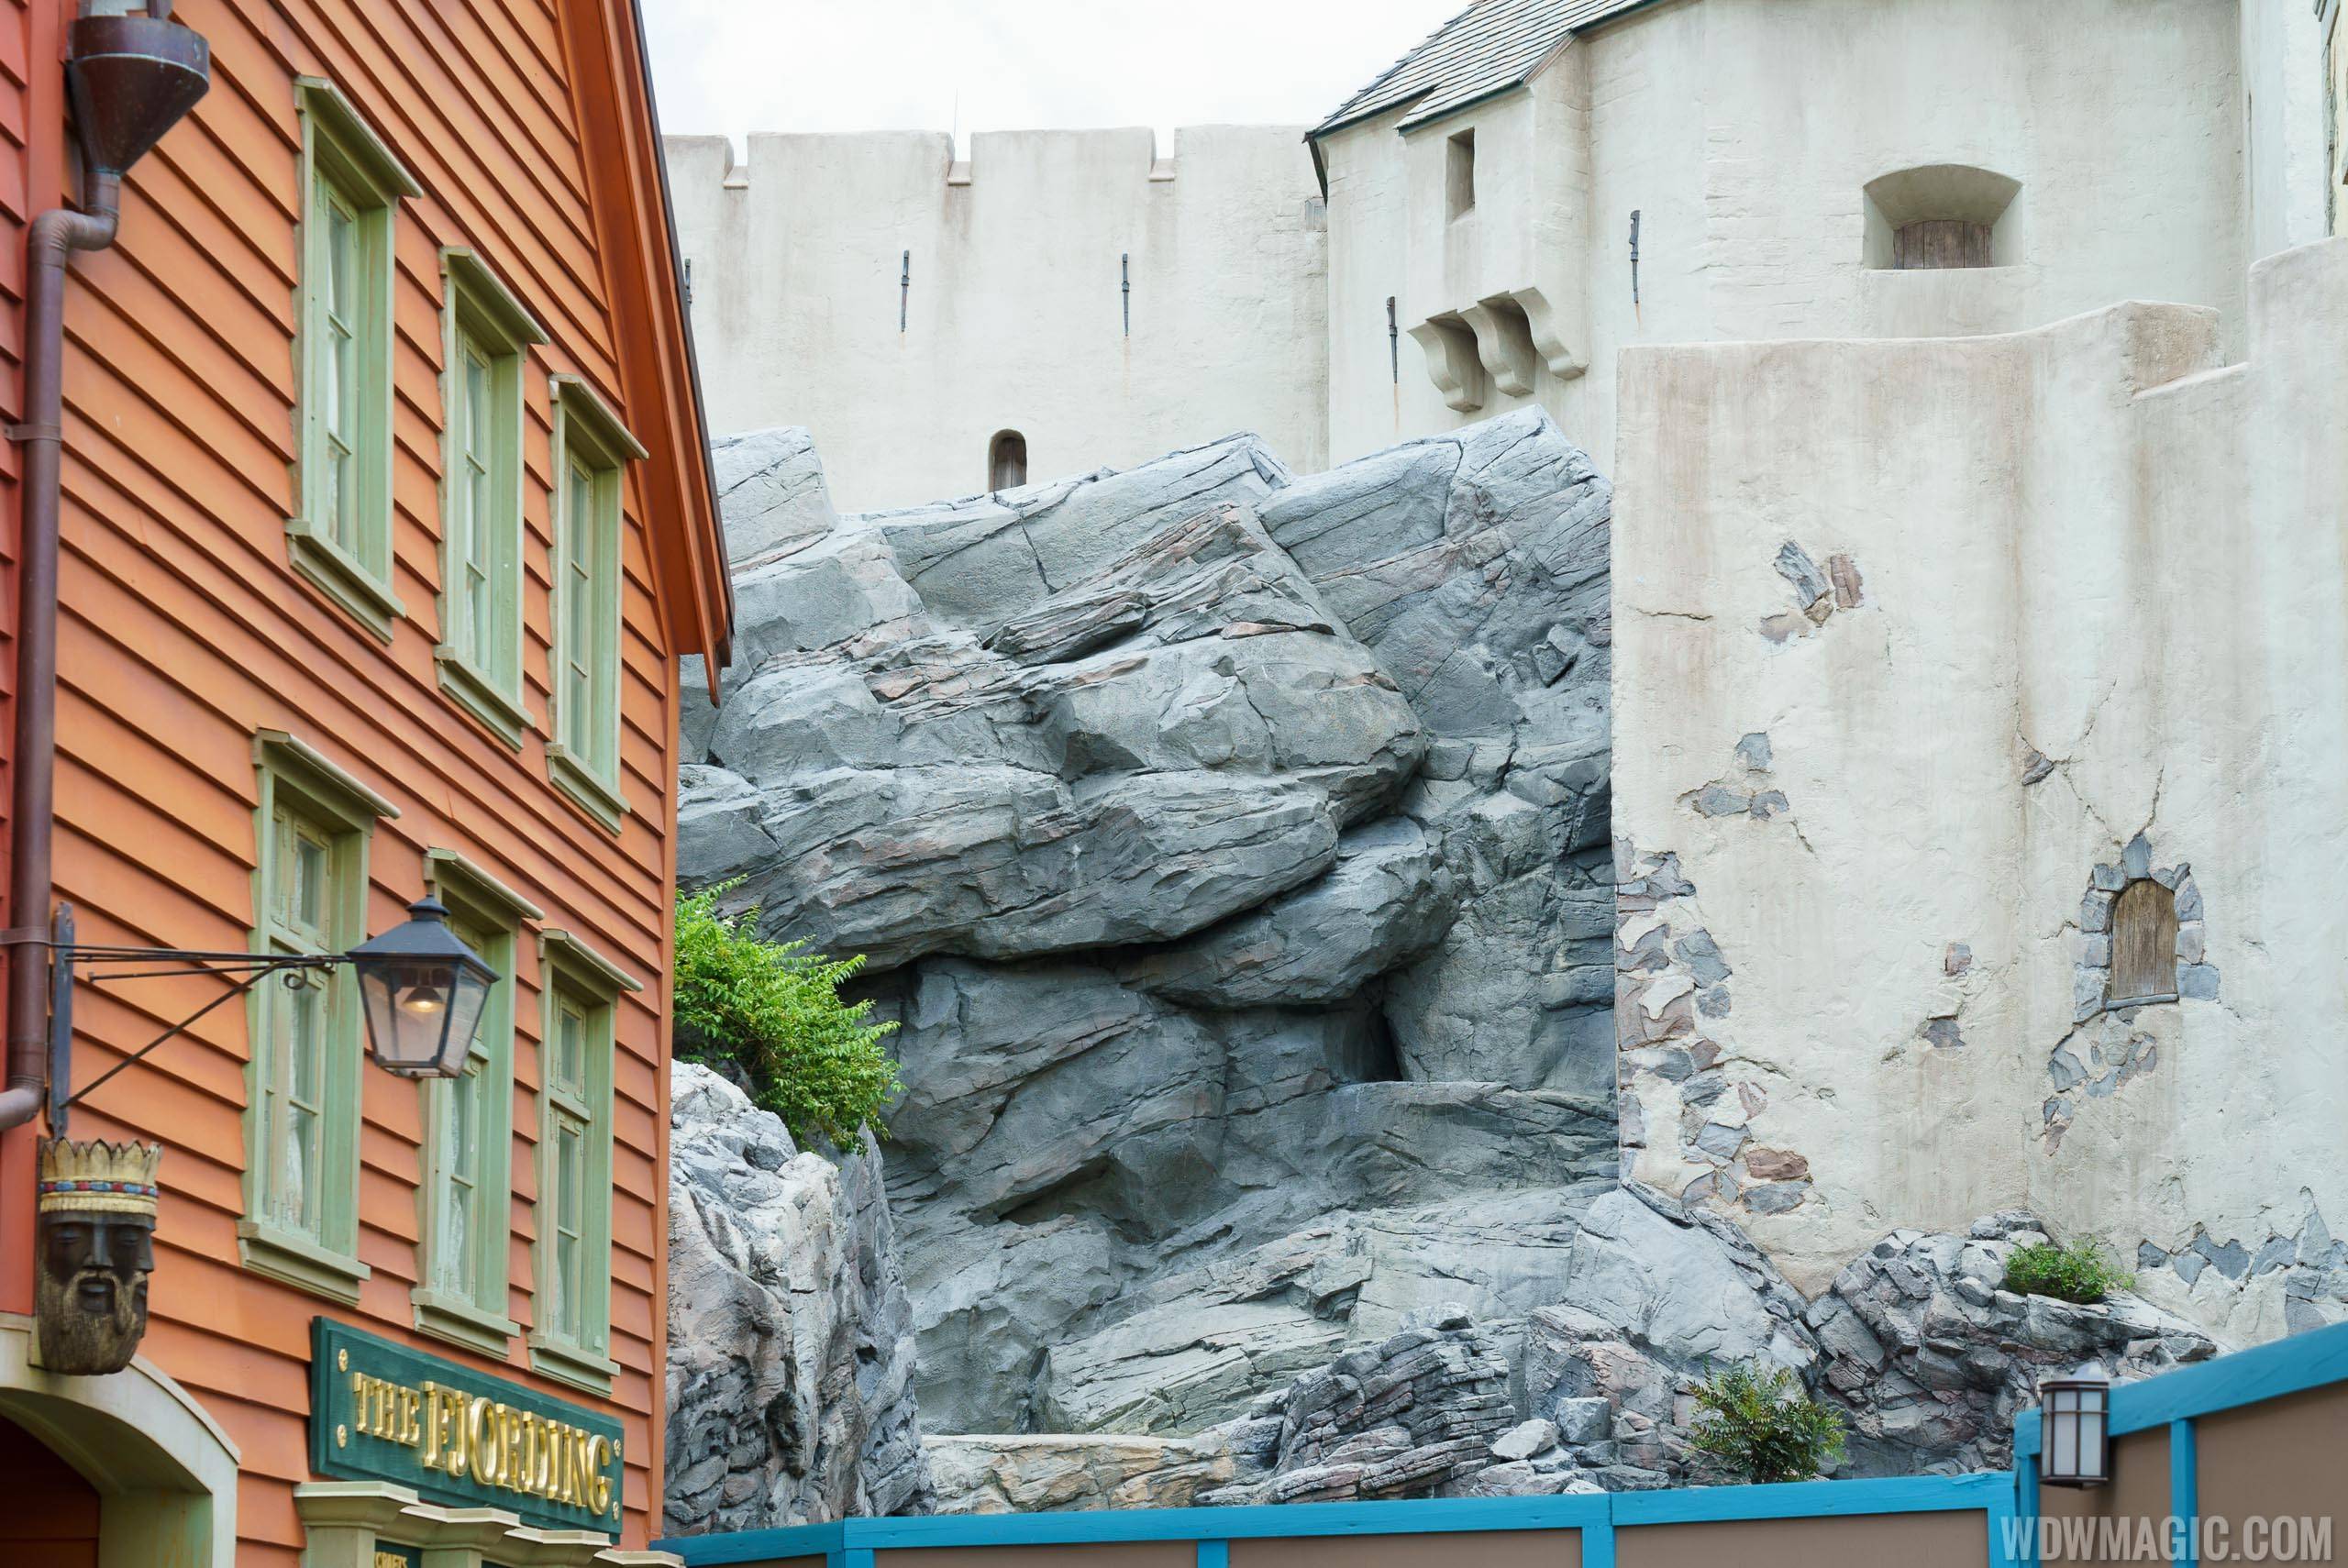 Frozen Ever After construction